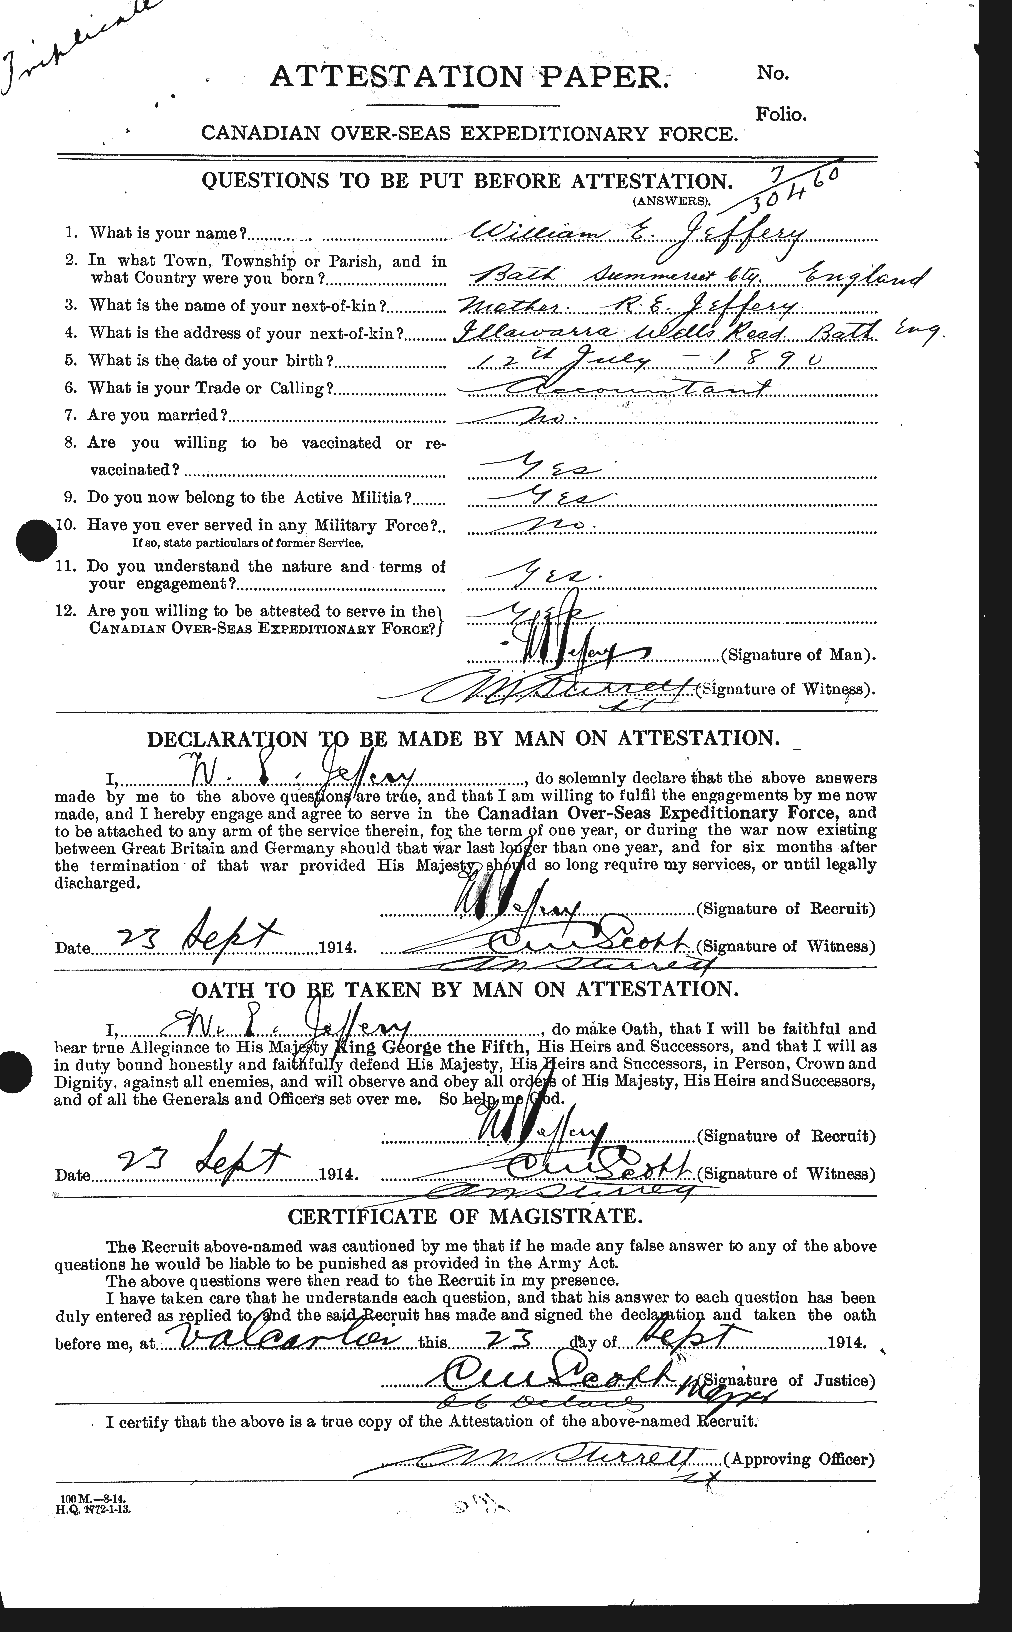 Personnel Records of the First World War - CEF 417811a